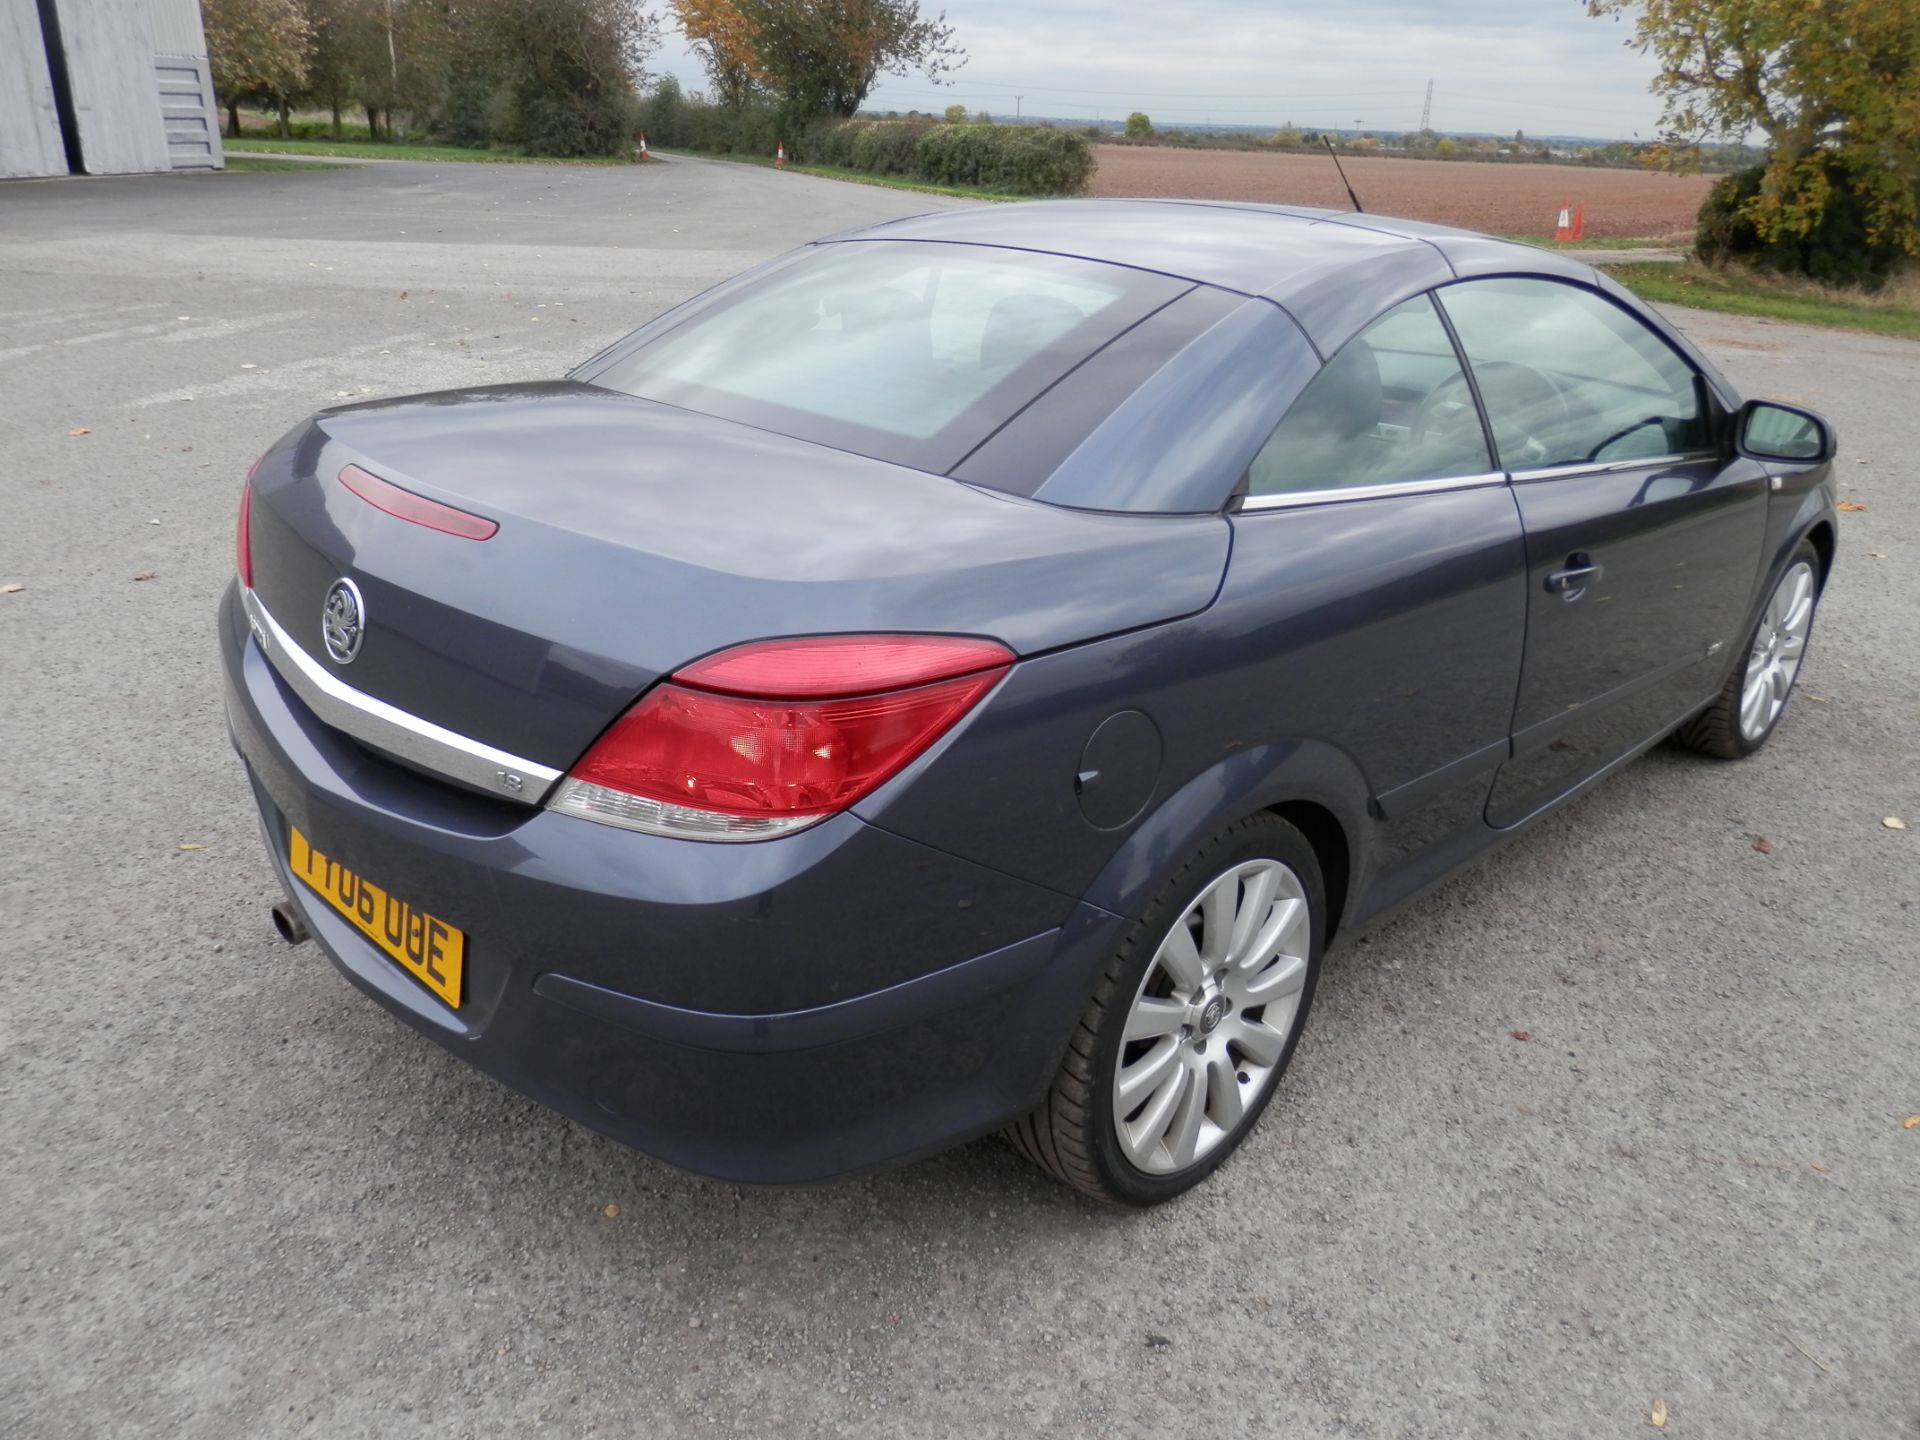 2006/06 VAUXHALL ASTRA DESIGN 1.8 SPORT TWIN TOP CONVERTIBLE, ONLY 62K MILES WARRANTED, MOT FEB 2017 - Image 3 of 24